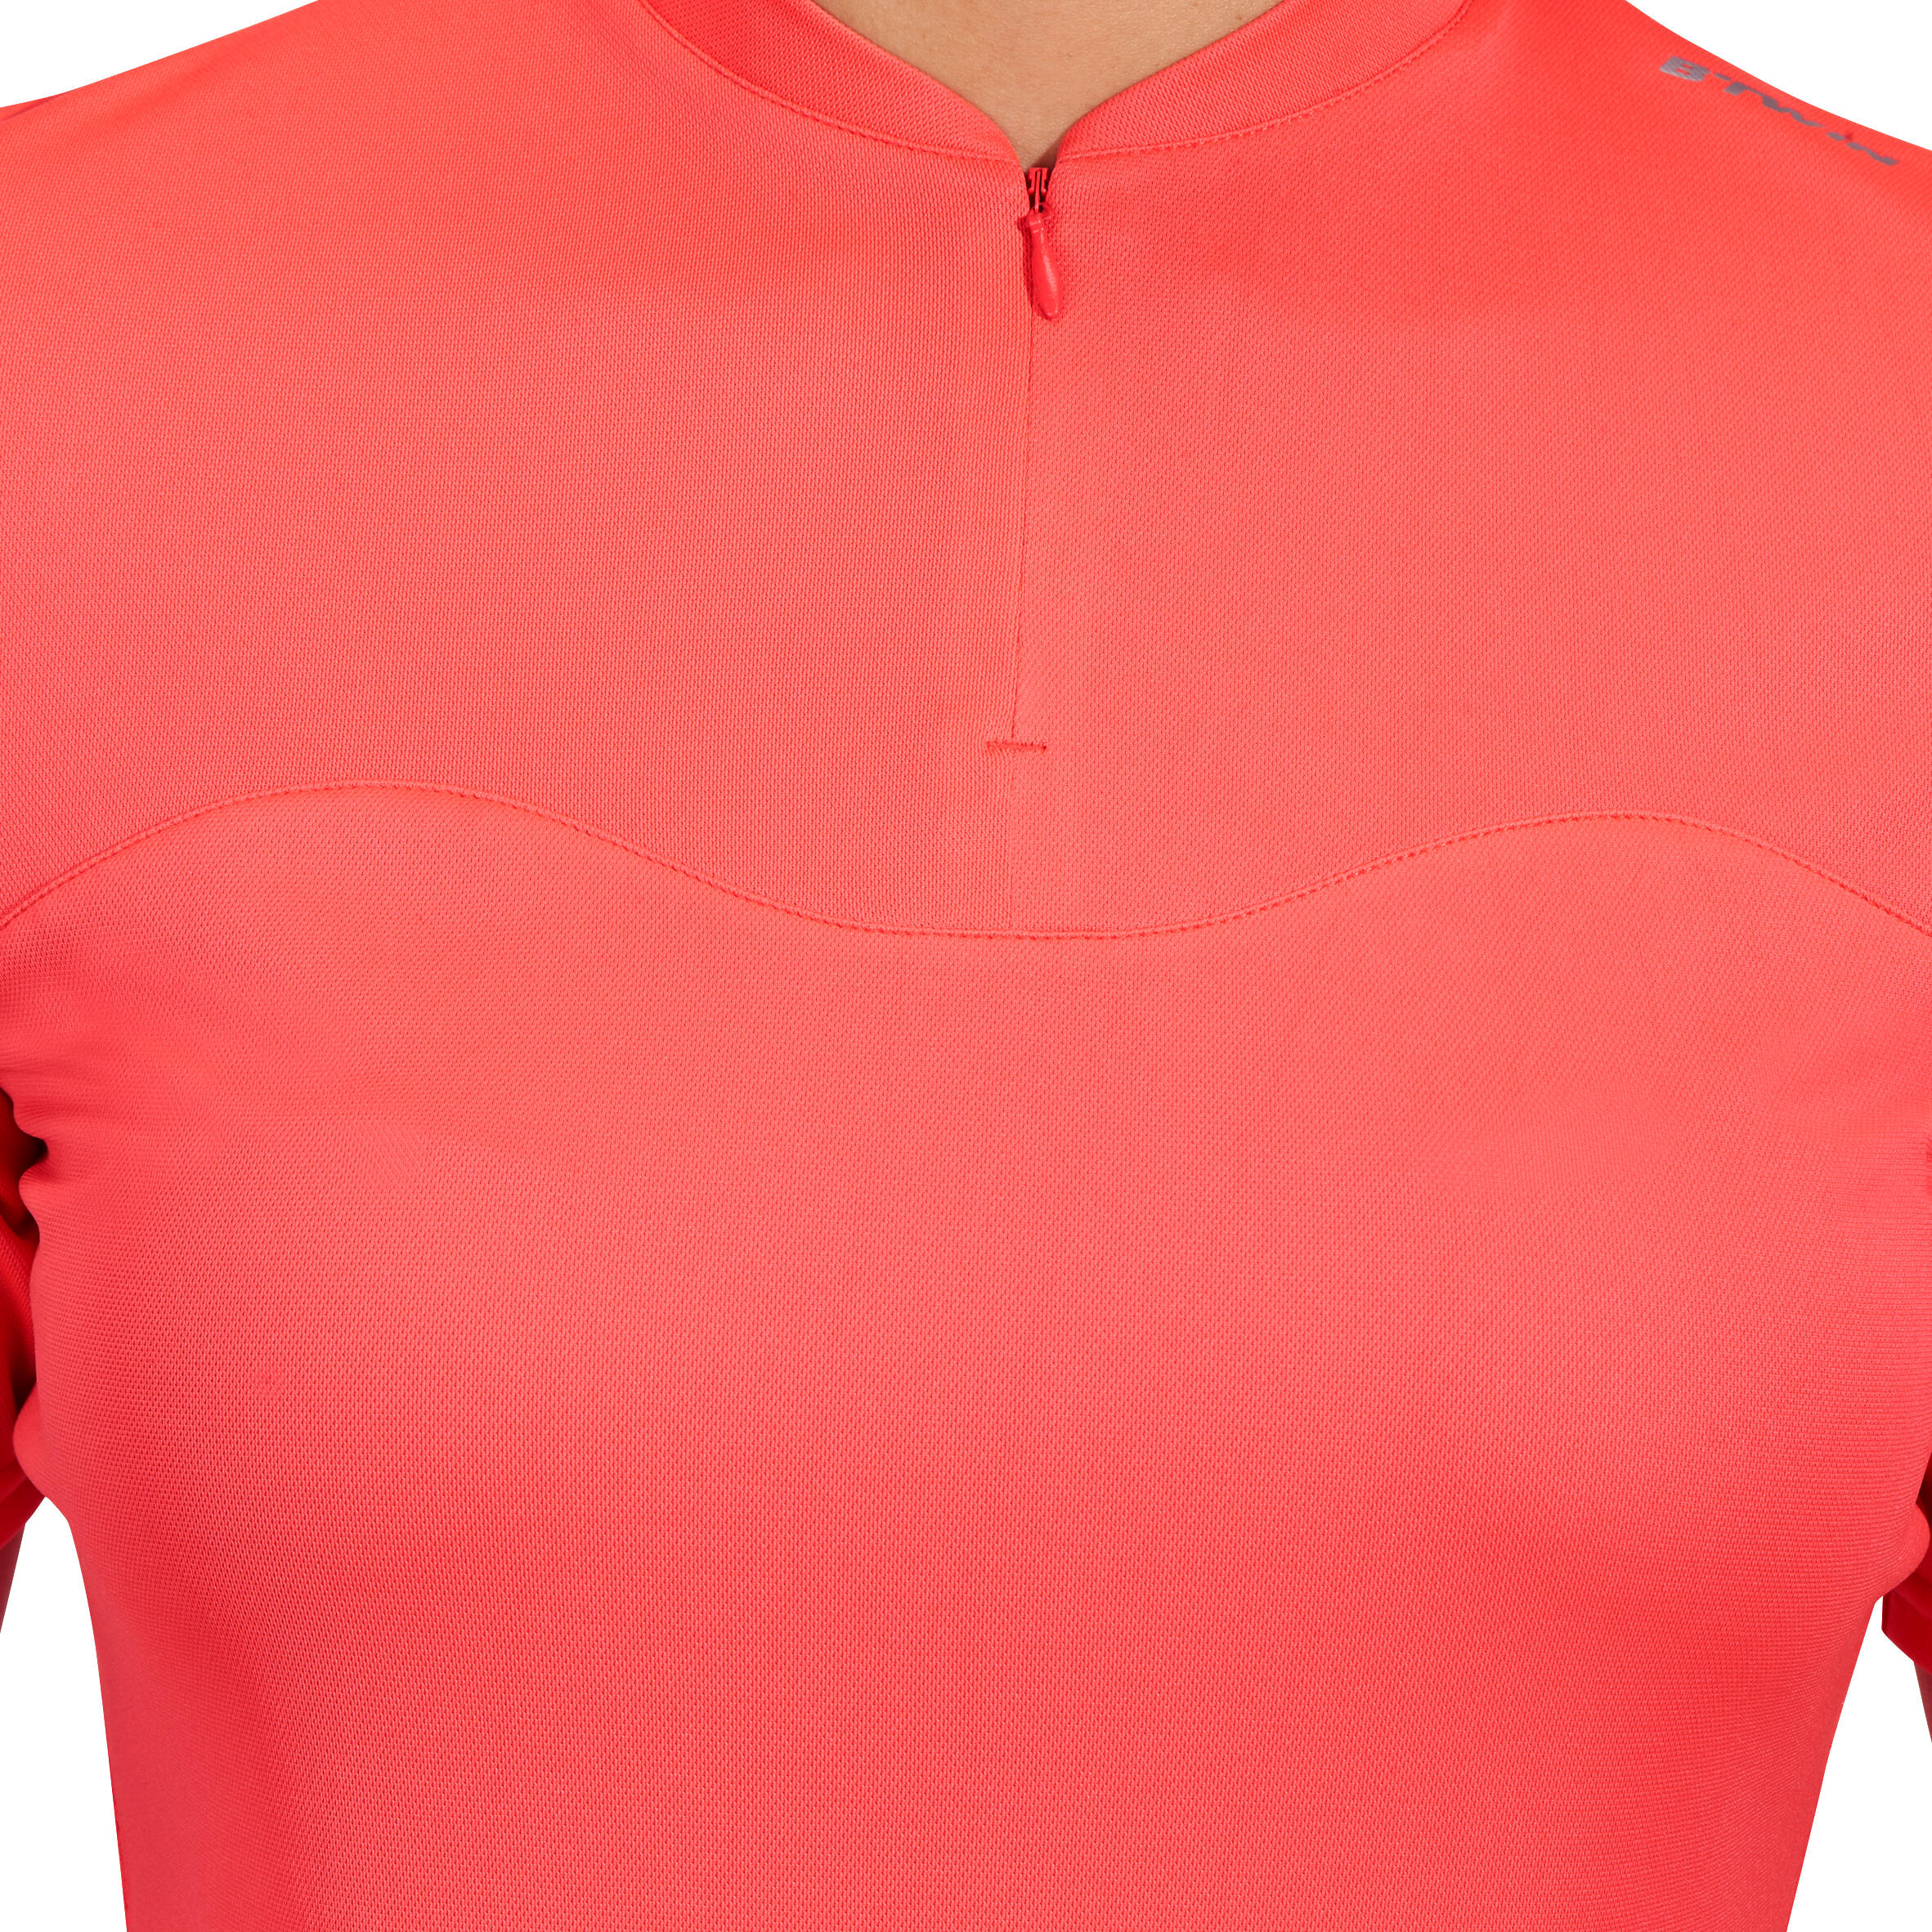 100 Women's Short-Sleeved Cycling Jersey - Pink 14/20